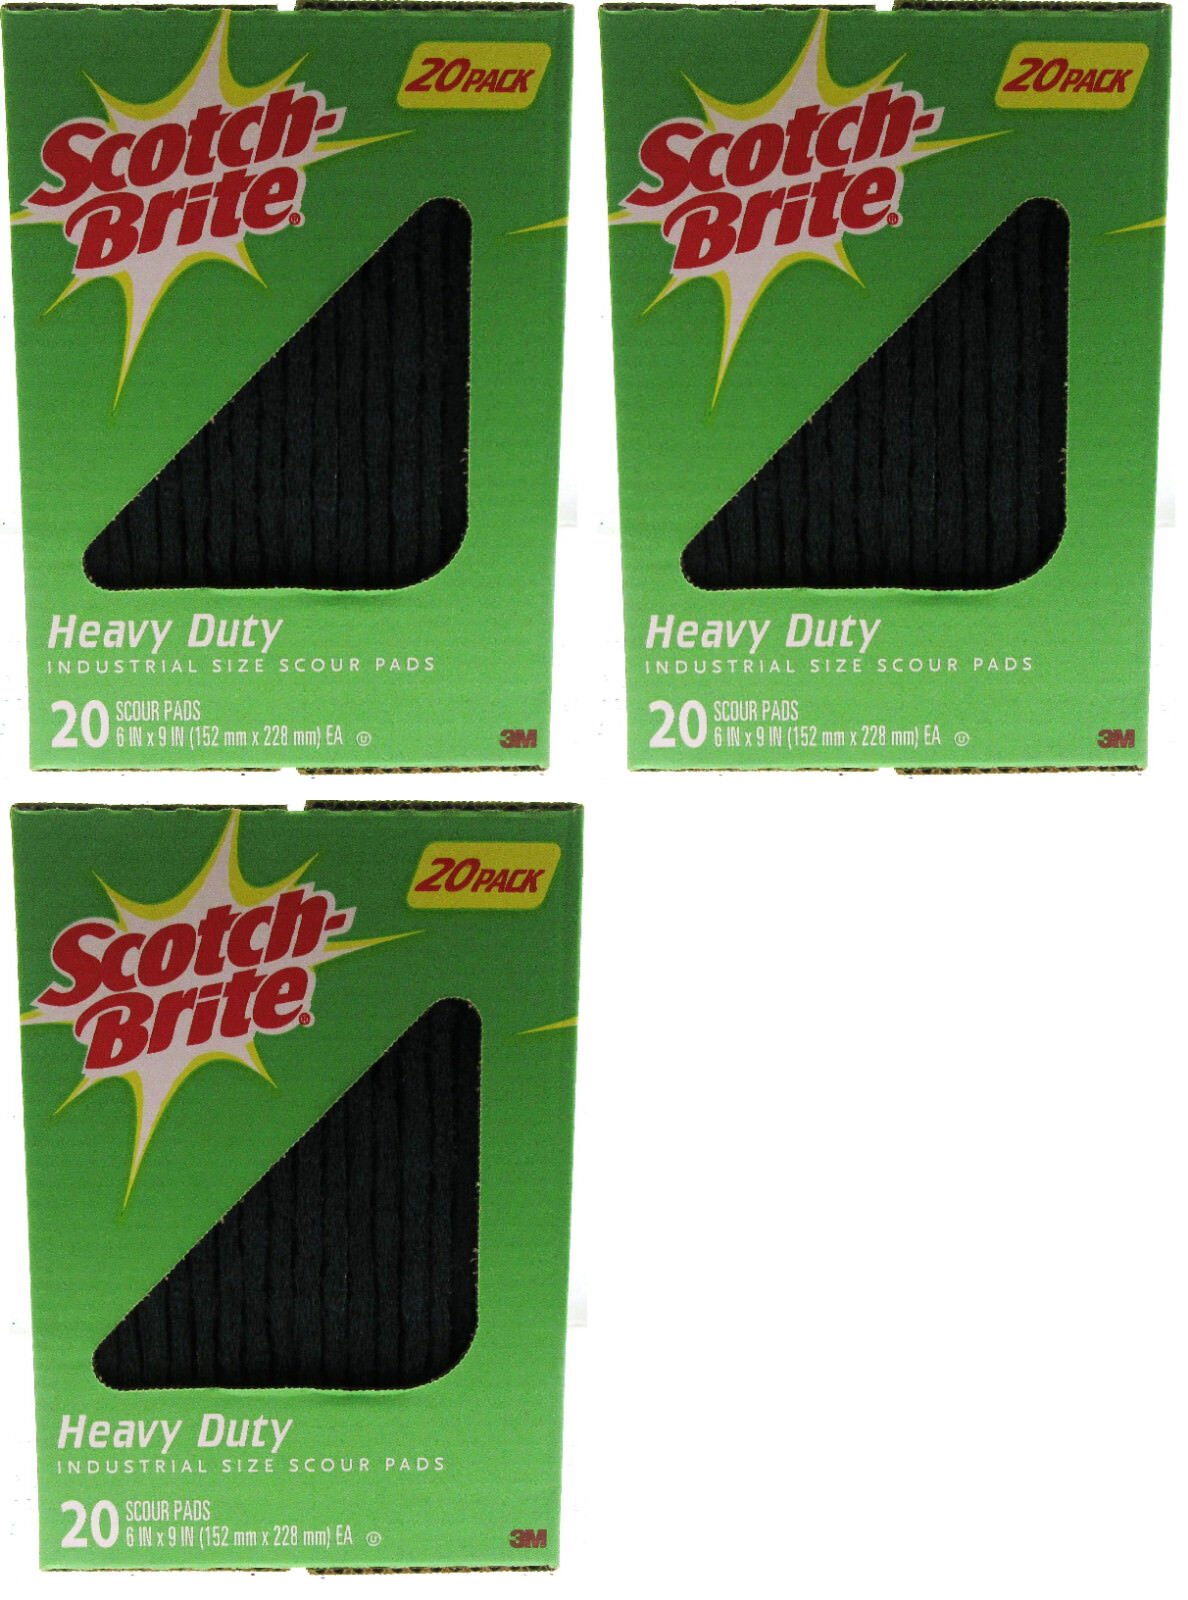 Scotch Brite Heavy Duty Industrial Size Box of 20 Scour Pads 6"x9" ~ Lot of 3